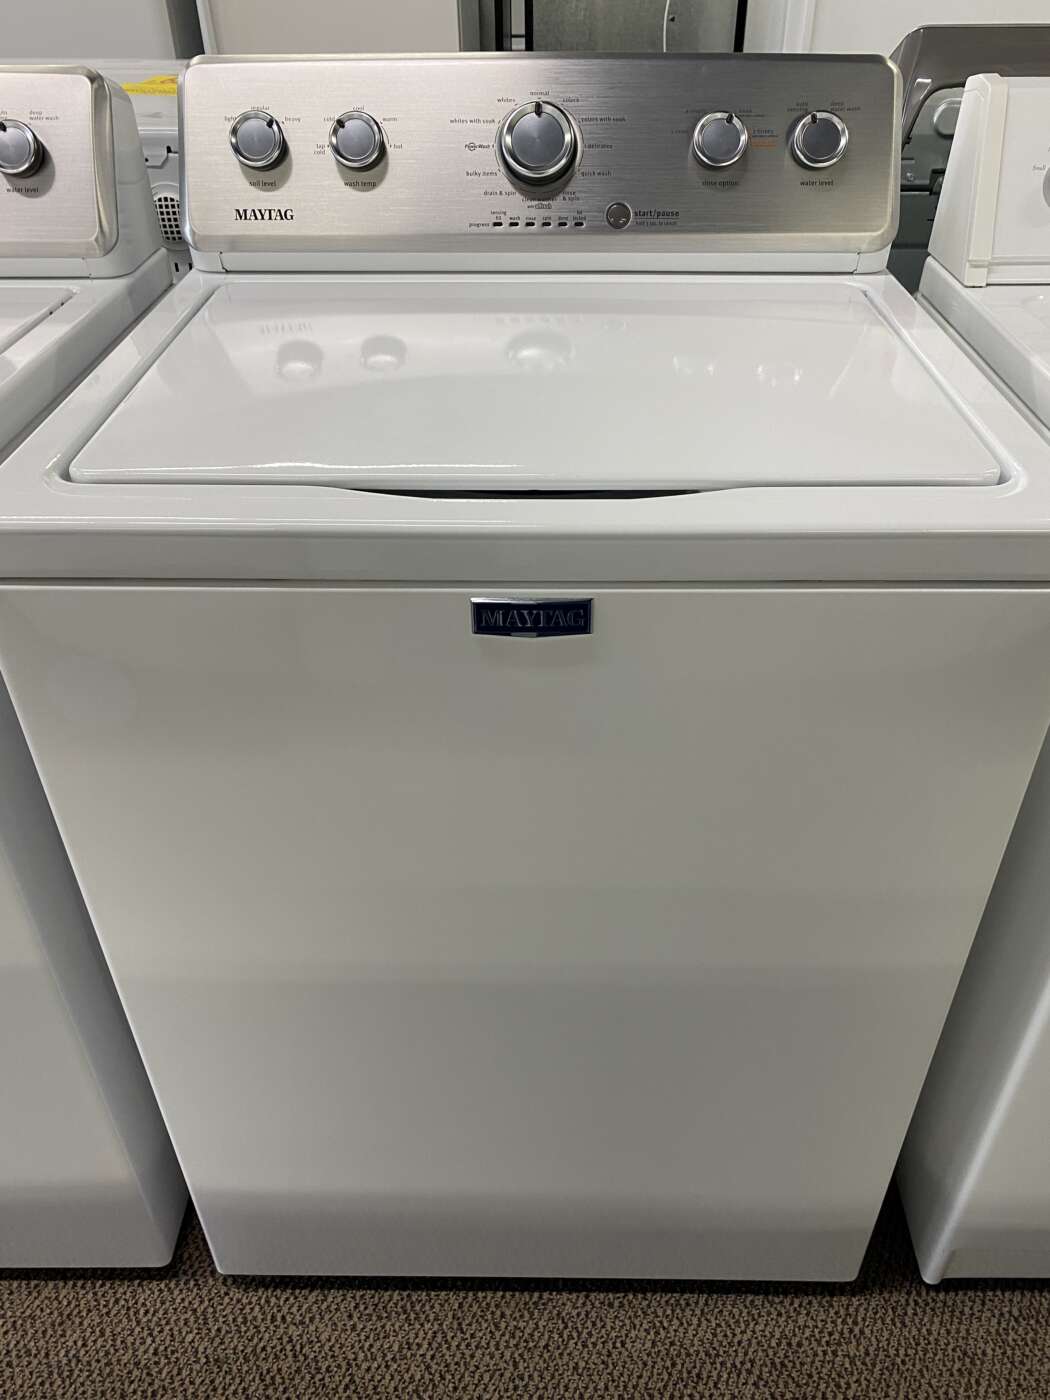 Reconditioned MAYTAG 3.8 Cu. Ft. Top-Load H/E Washer – White